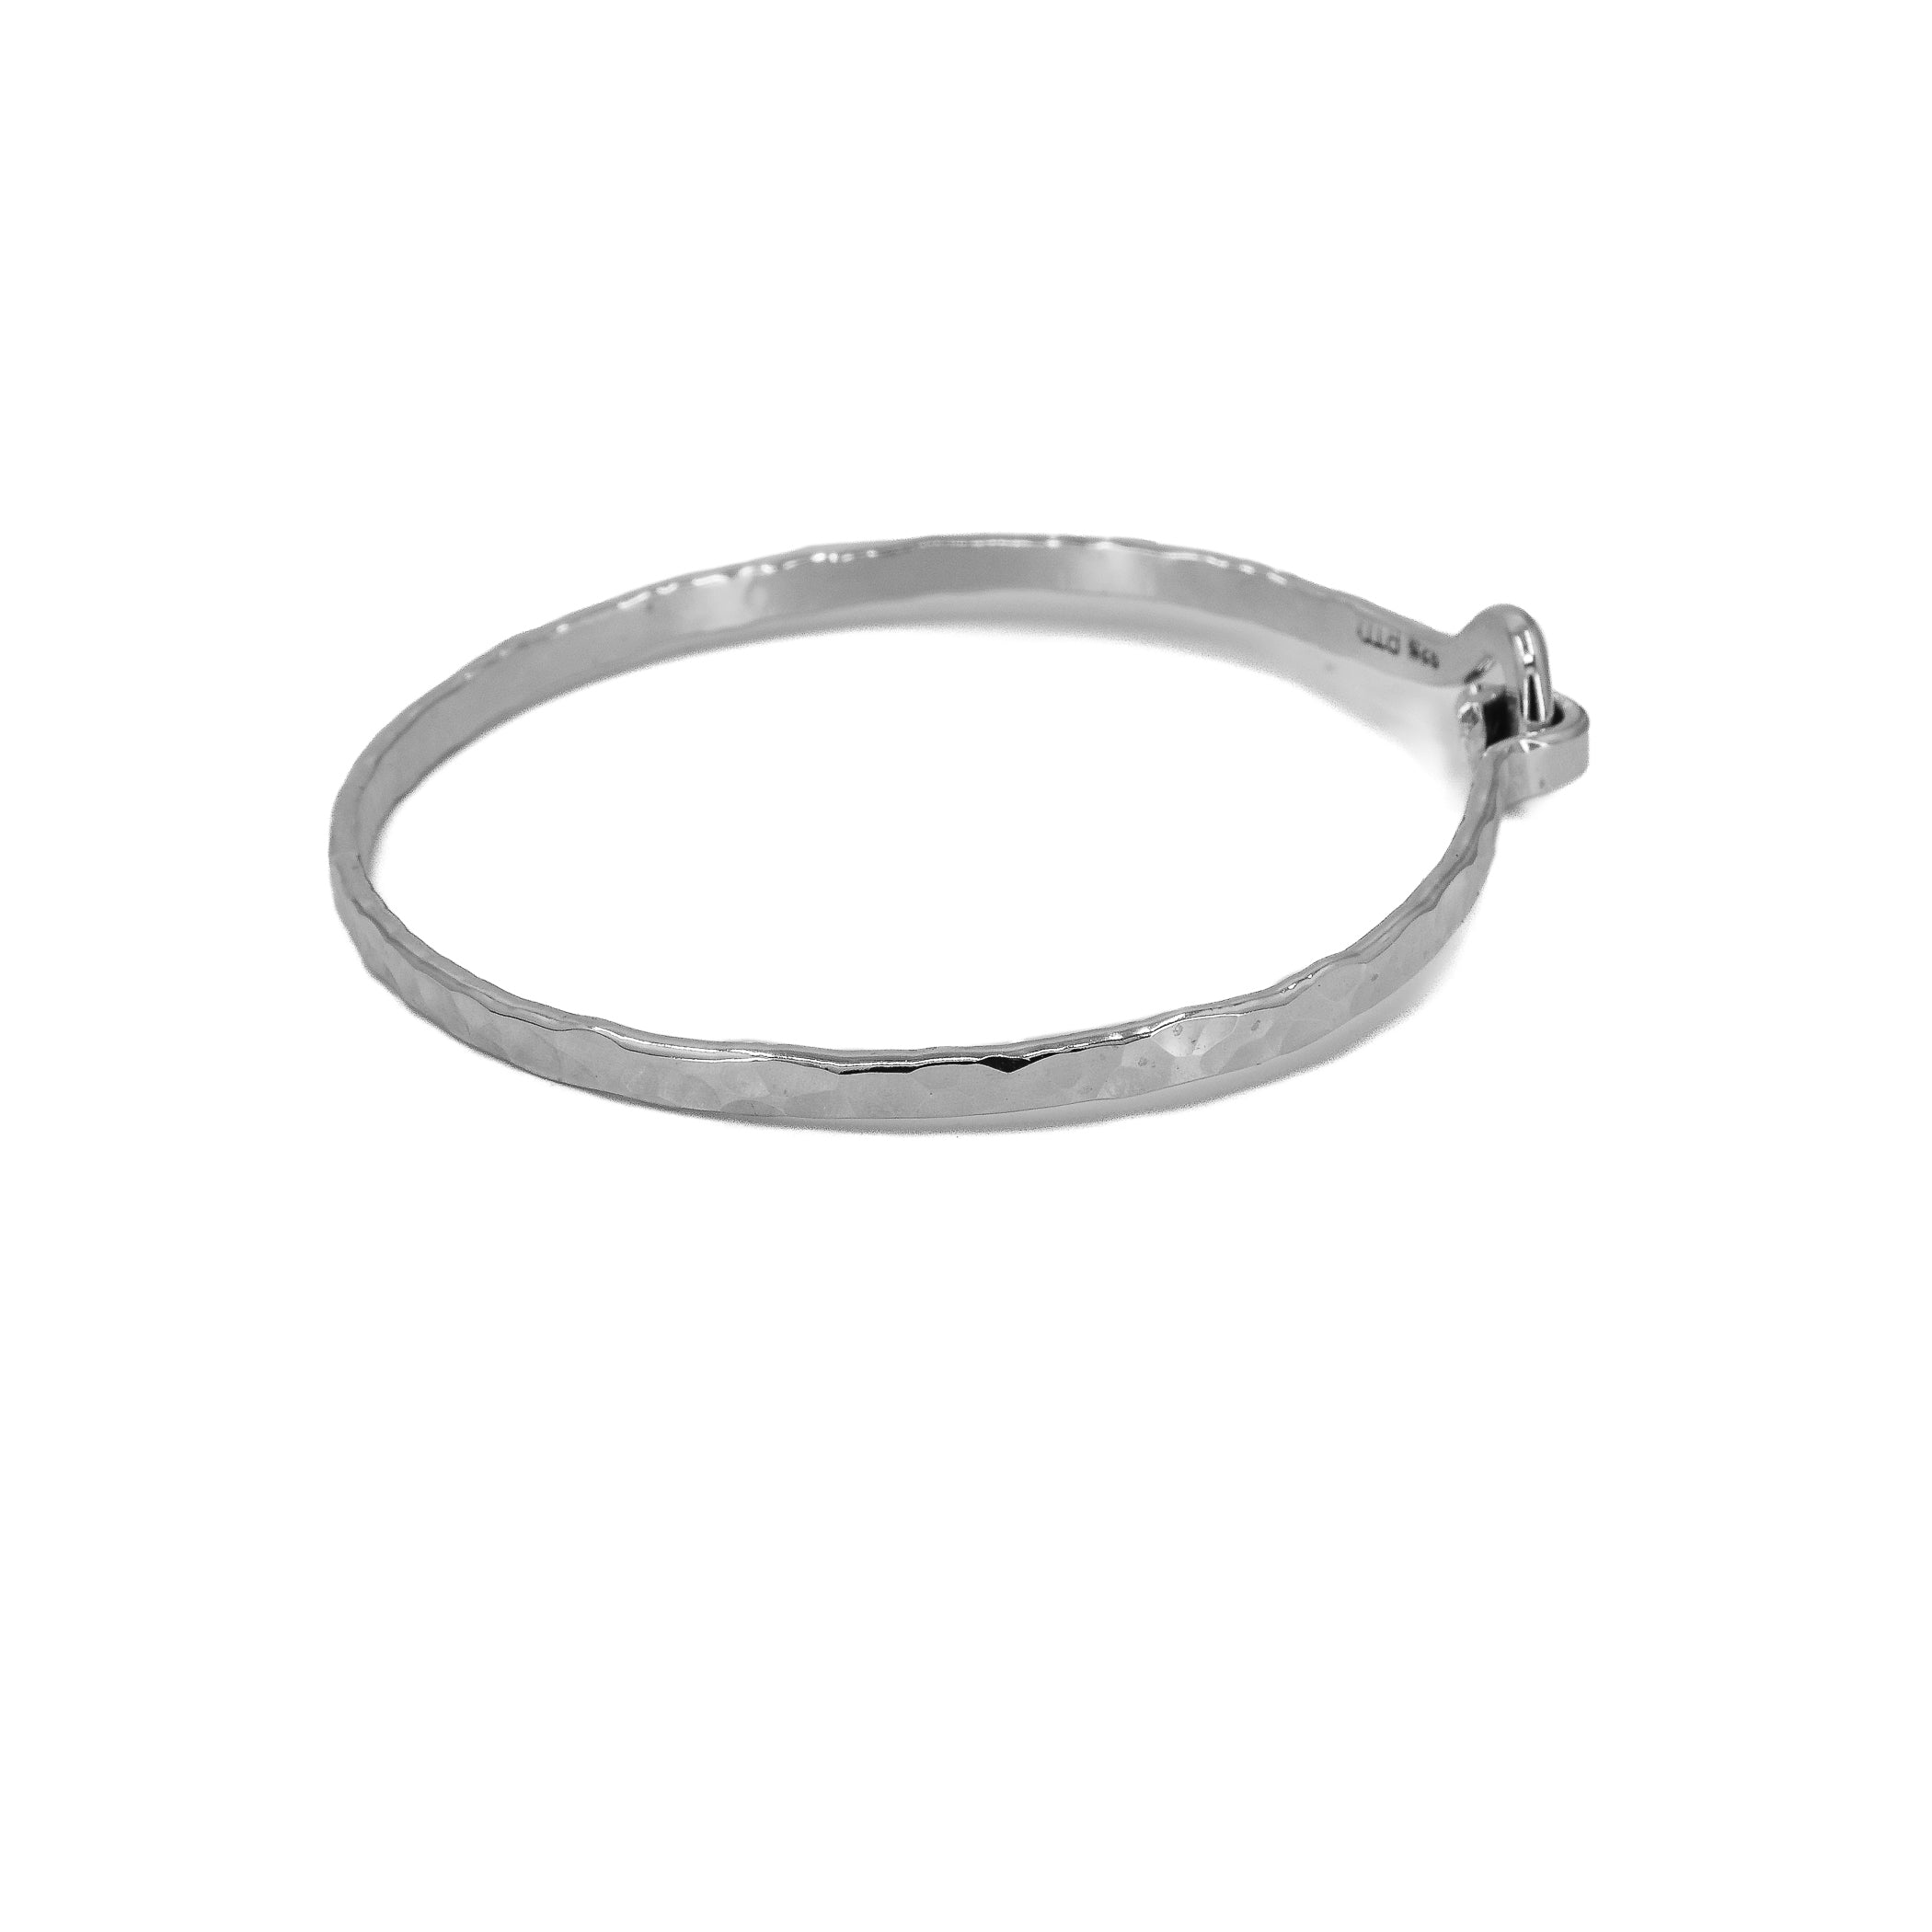 Heavy weight hammered sterling silver bangle bracelet